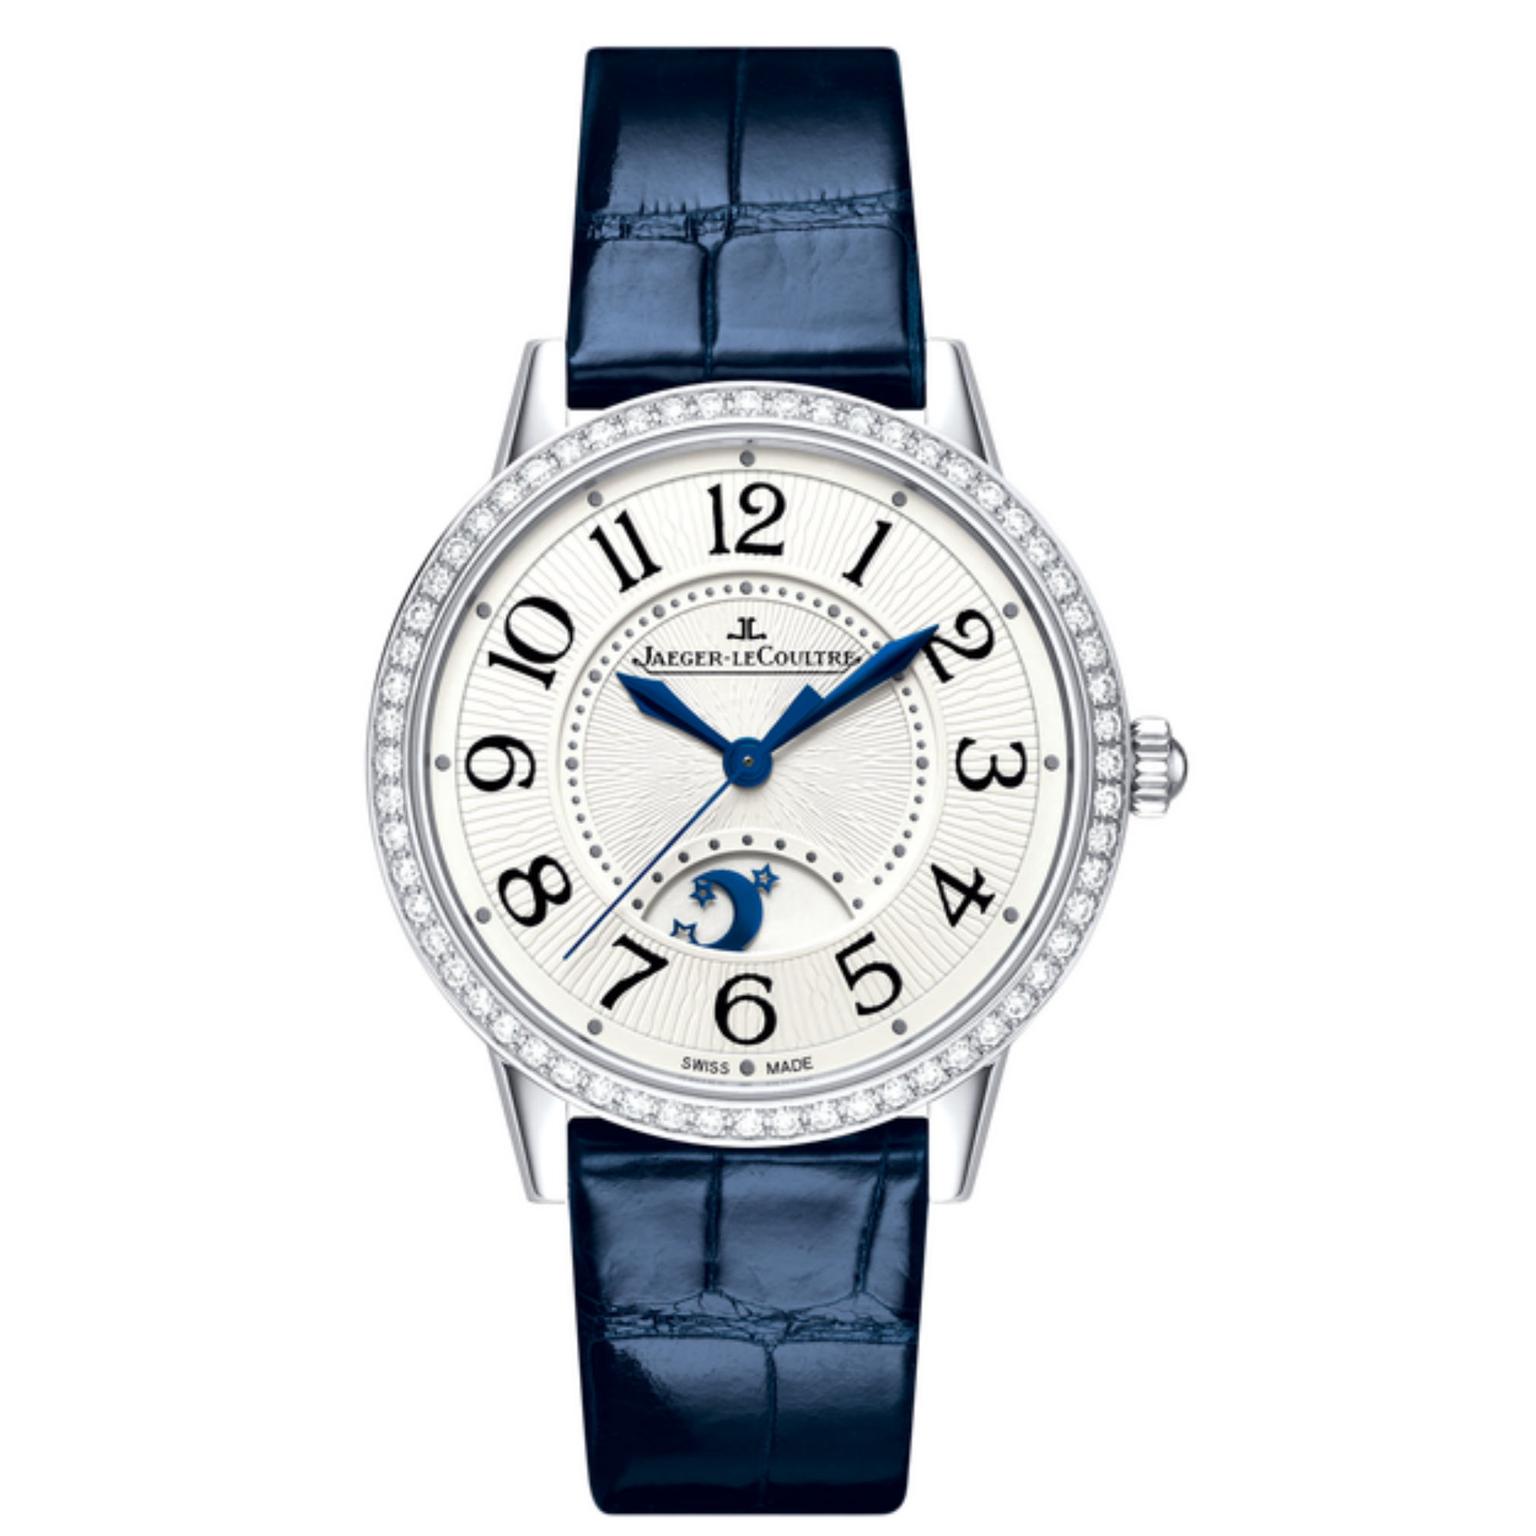 Jaeger-LeCoultre Rendez-Vous Night watch with diamonds